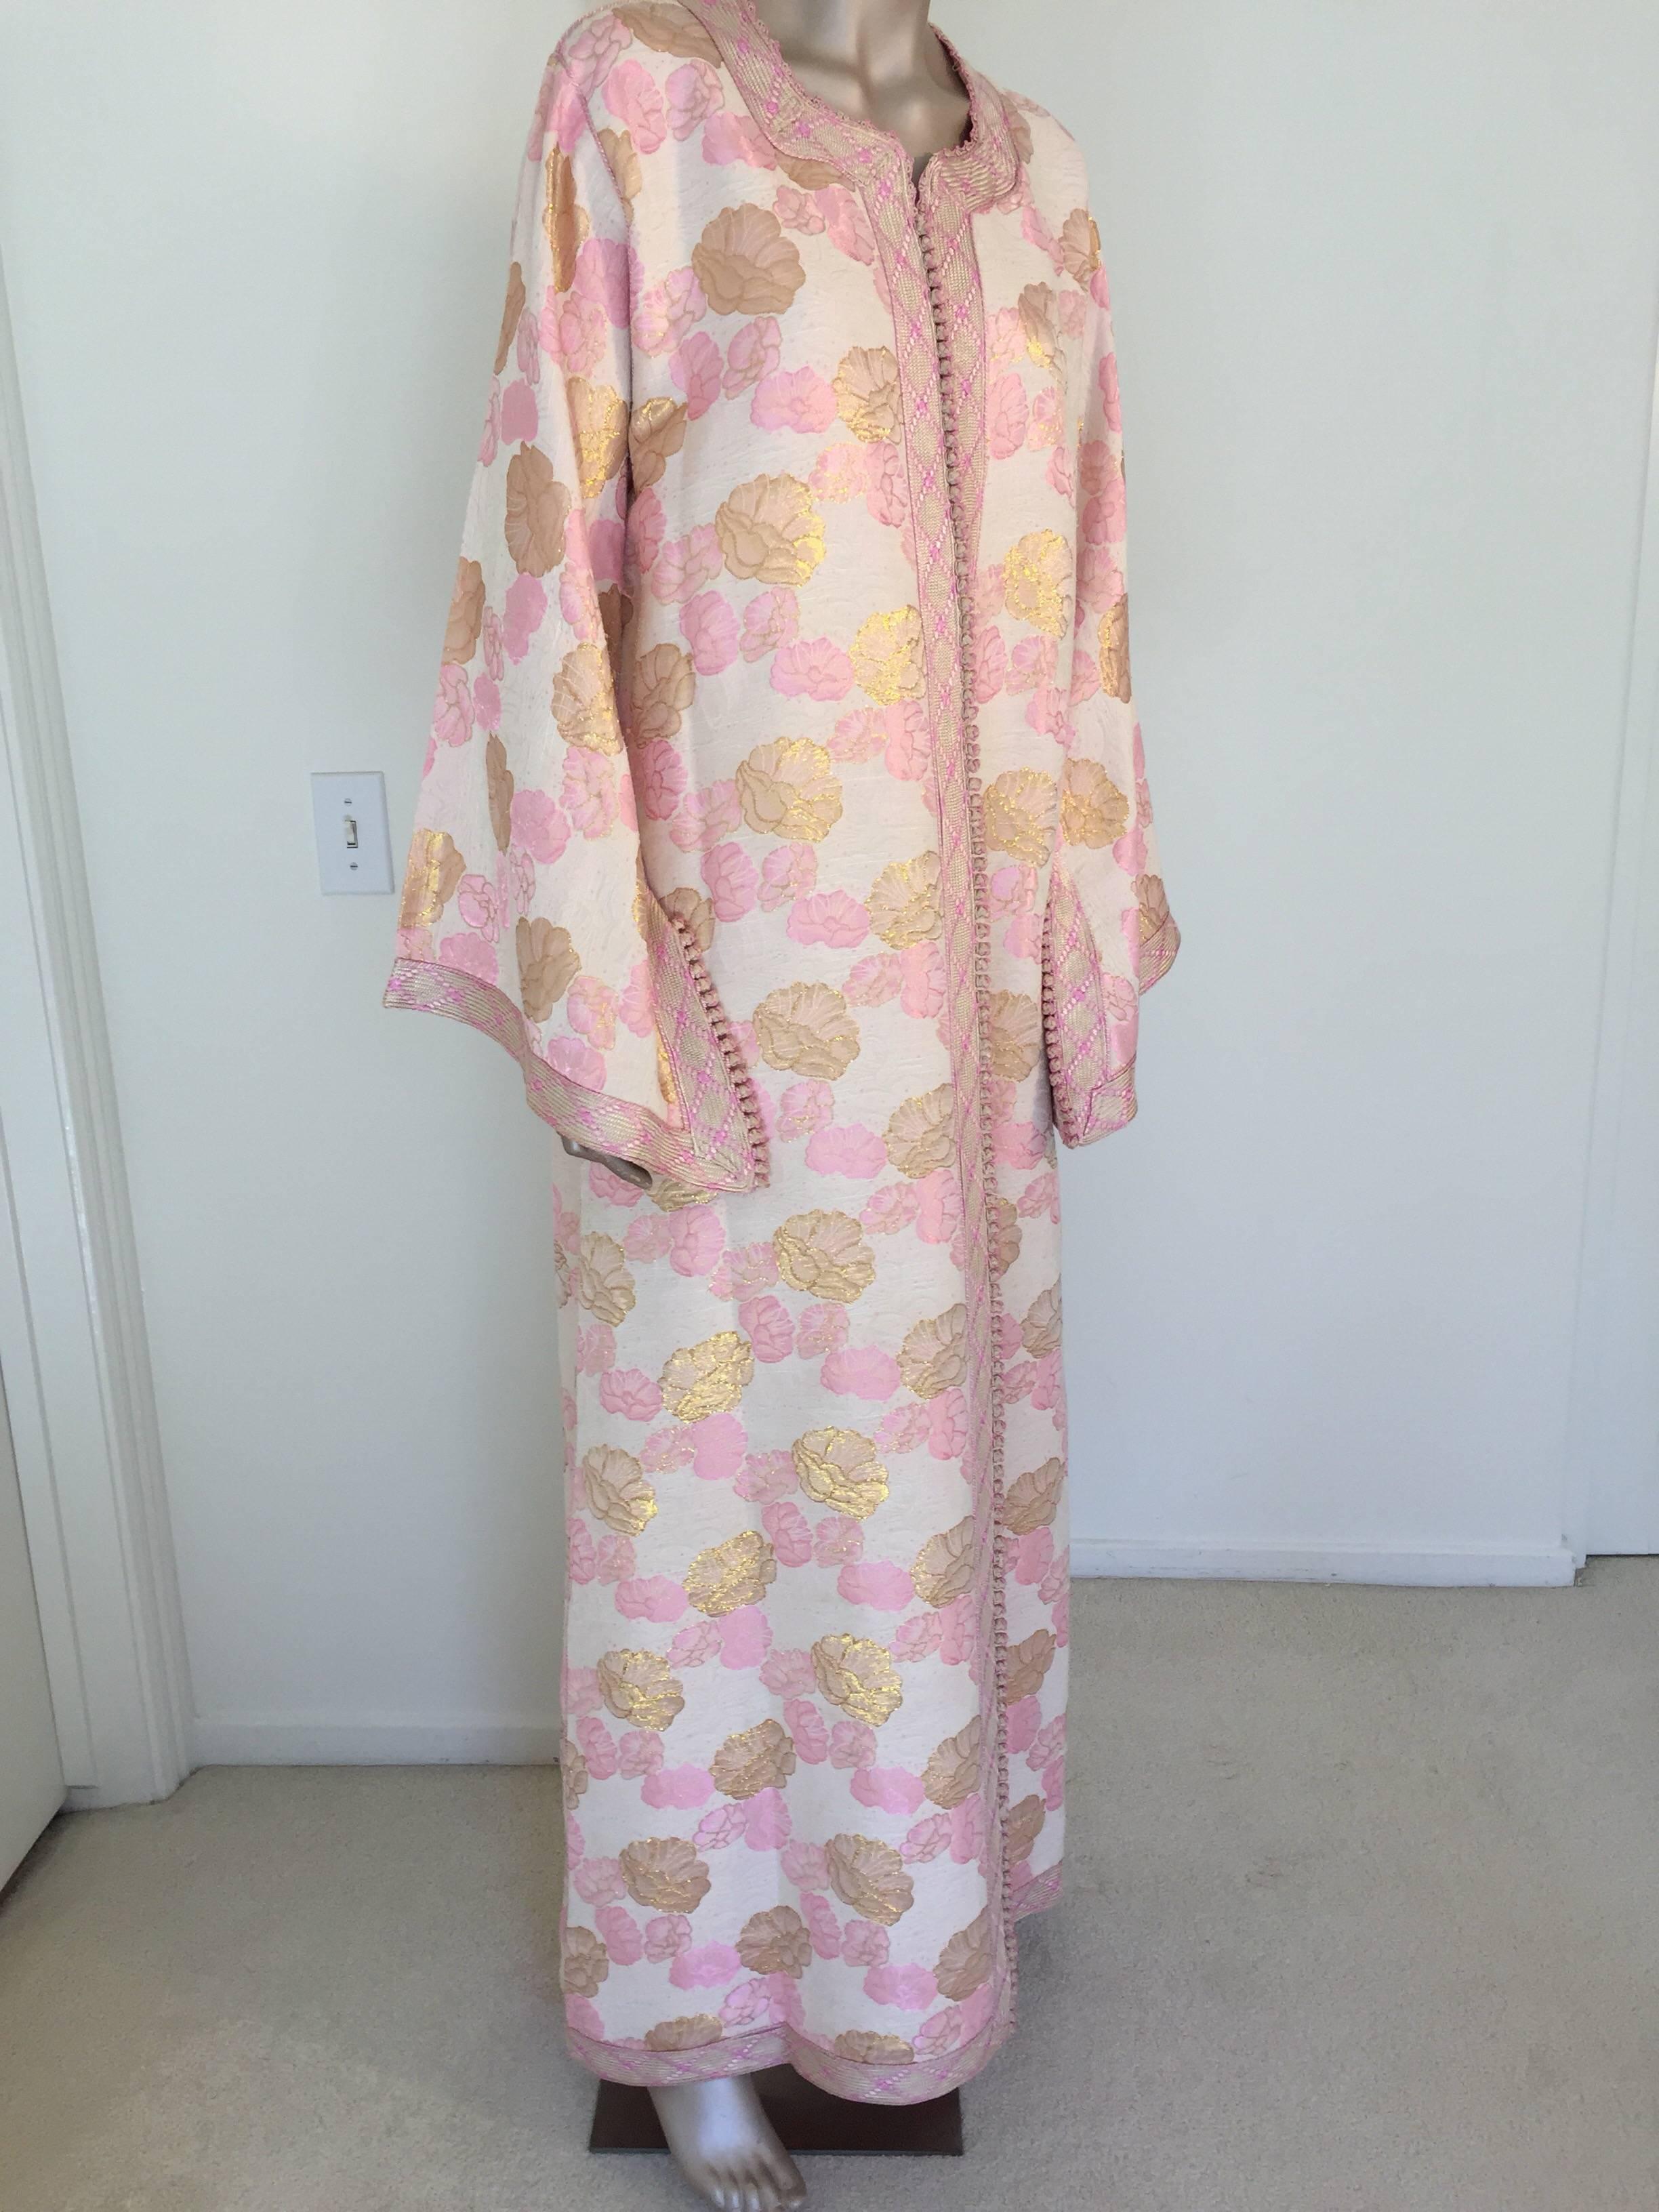 Elegant vintage designer brocade Moroccan kaftan, embroidered with pink and gold trim.
This chic Gypsy Bohemian maxi dress kaftan is embroidered and embellished with gold thread metallic trim. 
One of a kind made to measure designer Moroccan